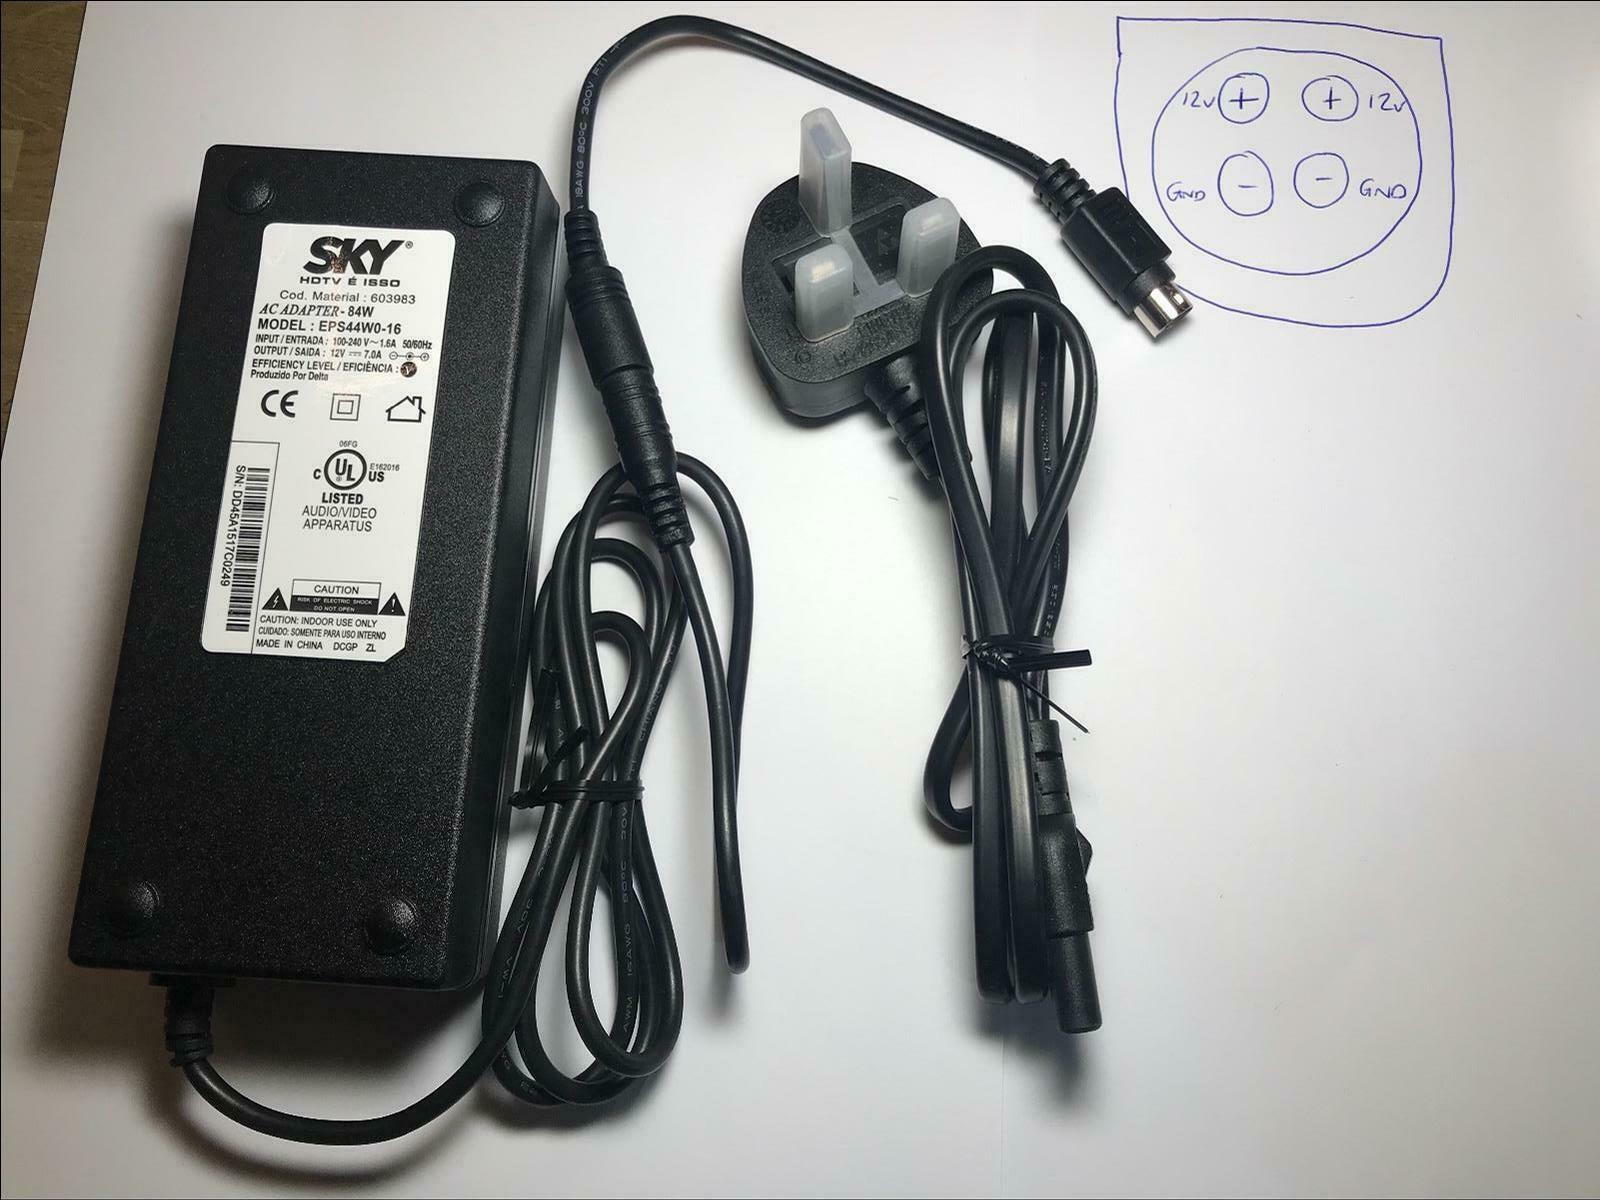 New SKY 603983 EPS44W0-16 AC Adapter 12V 7A 4 Pin power supply